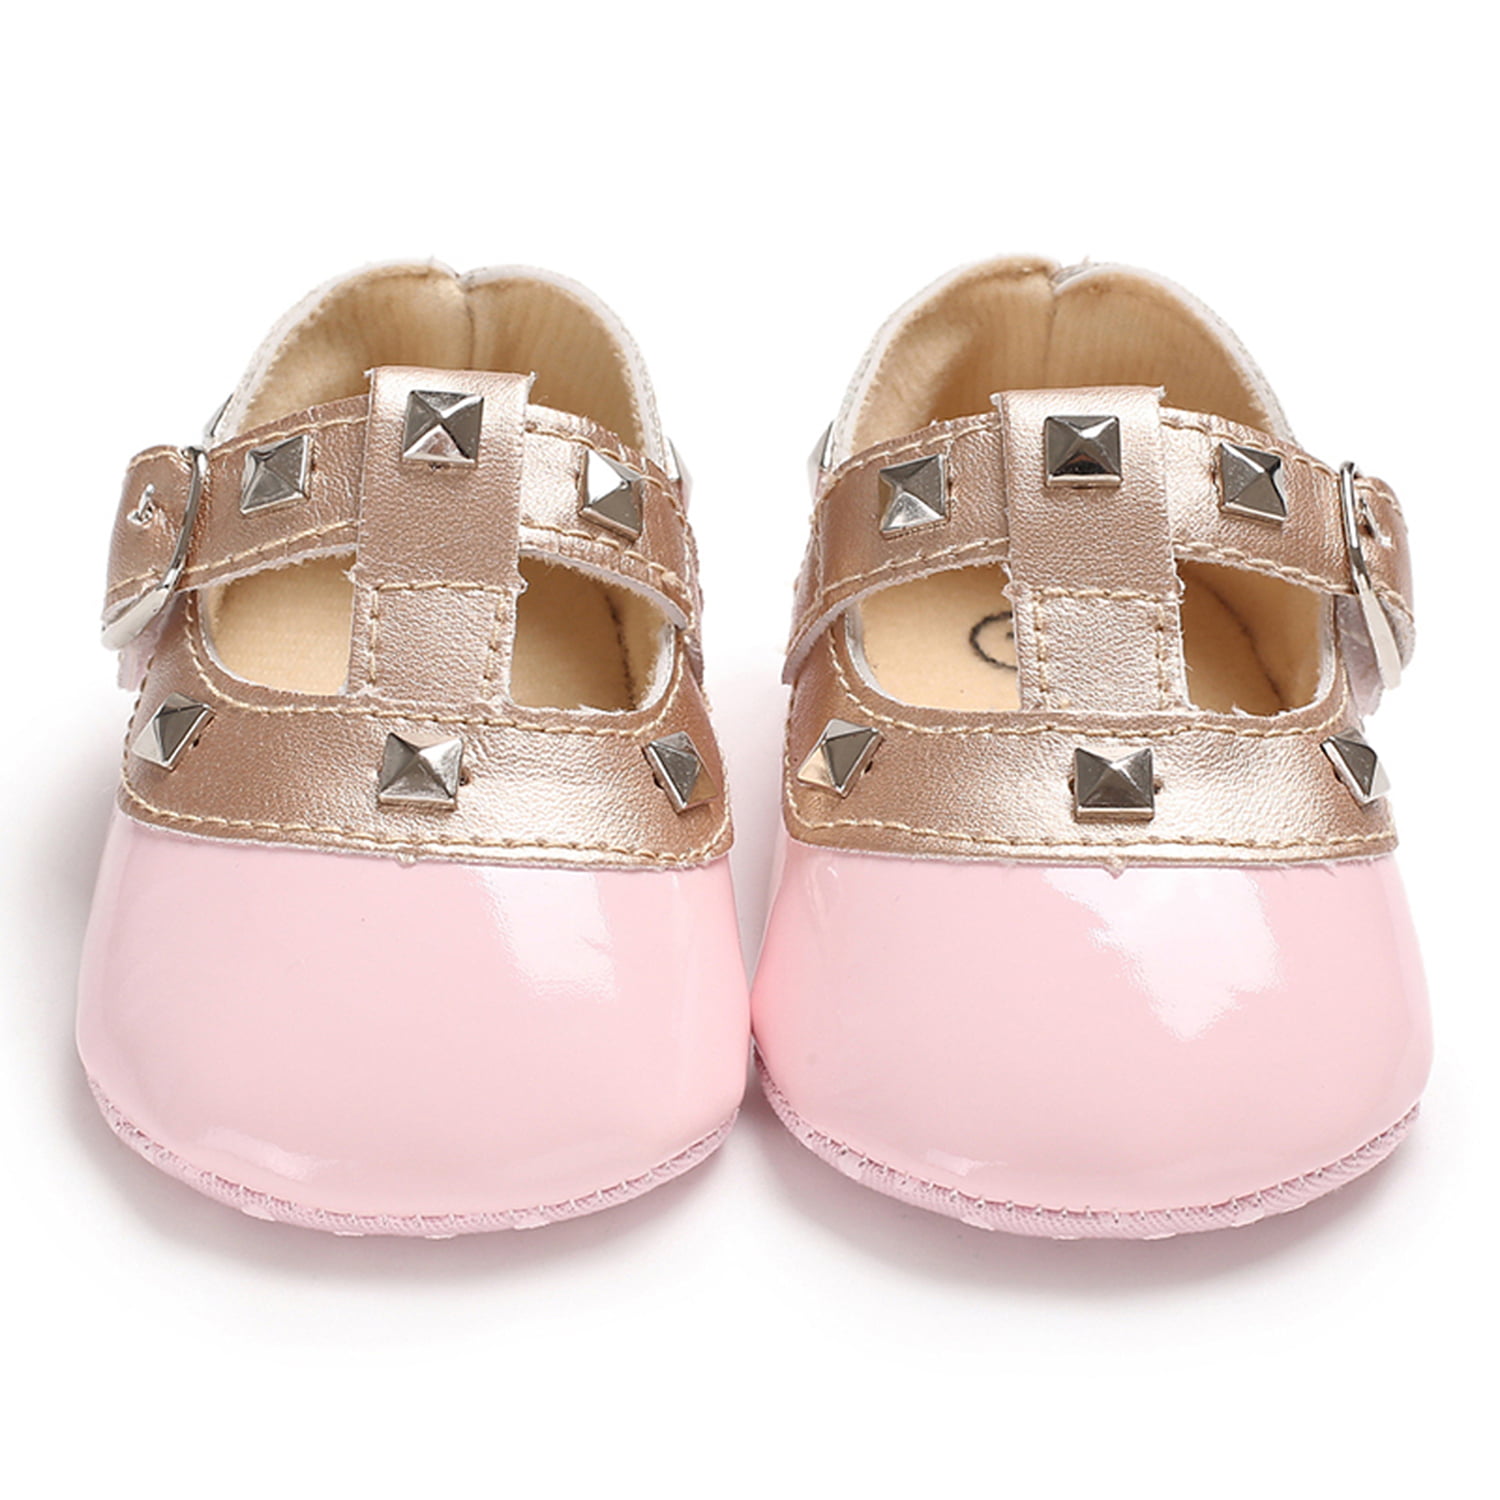 So Lovely Newborn Baby Girl Pram Shoes Princess First Shoes Size 0-6 6-12 12-18M